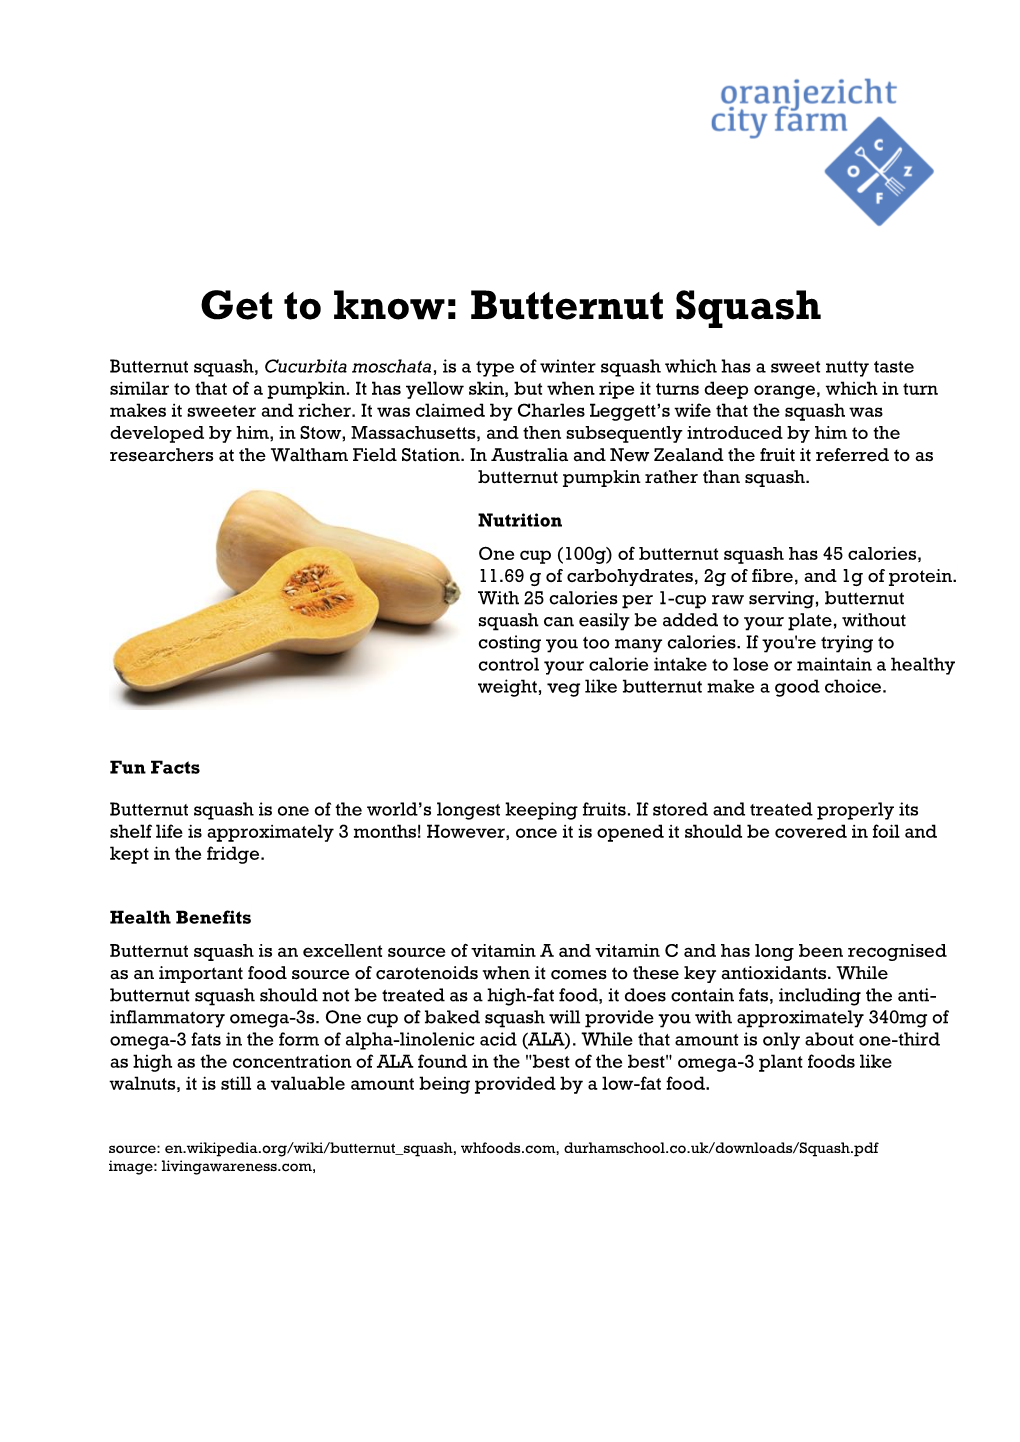 Get to Know: Butternut Squash